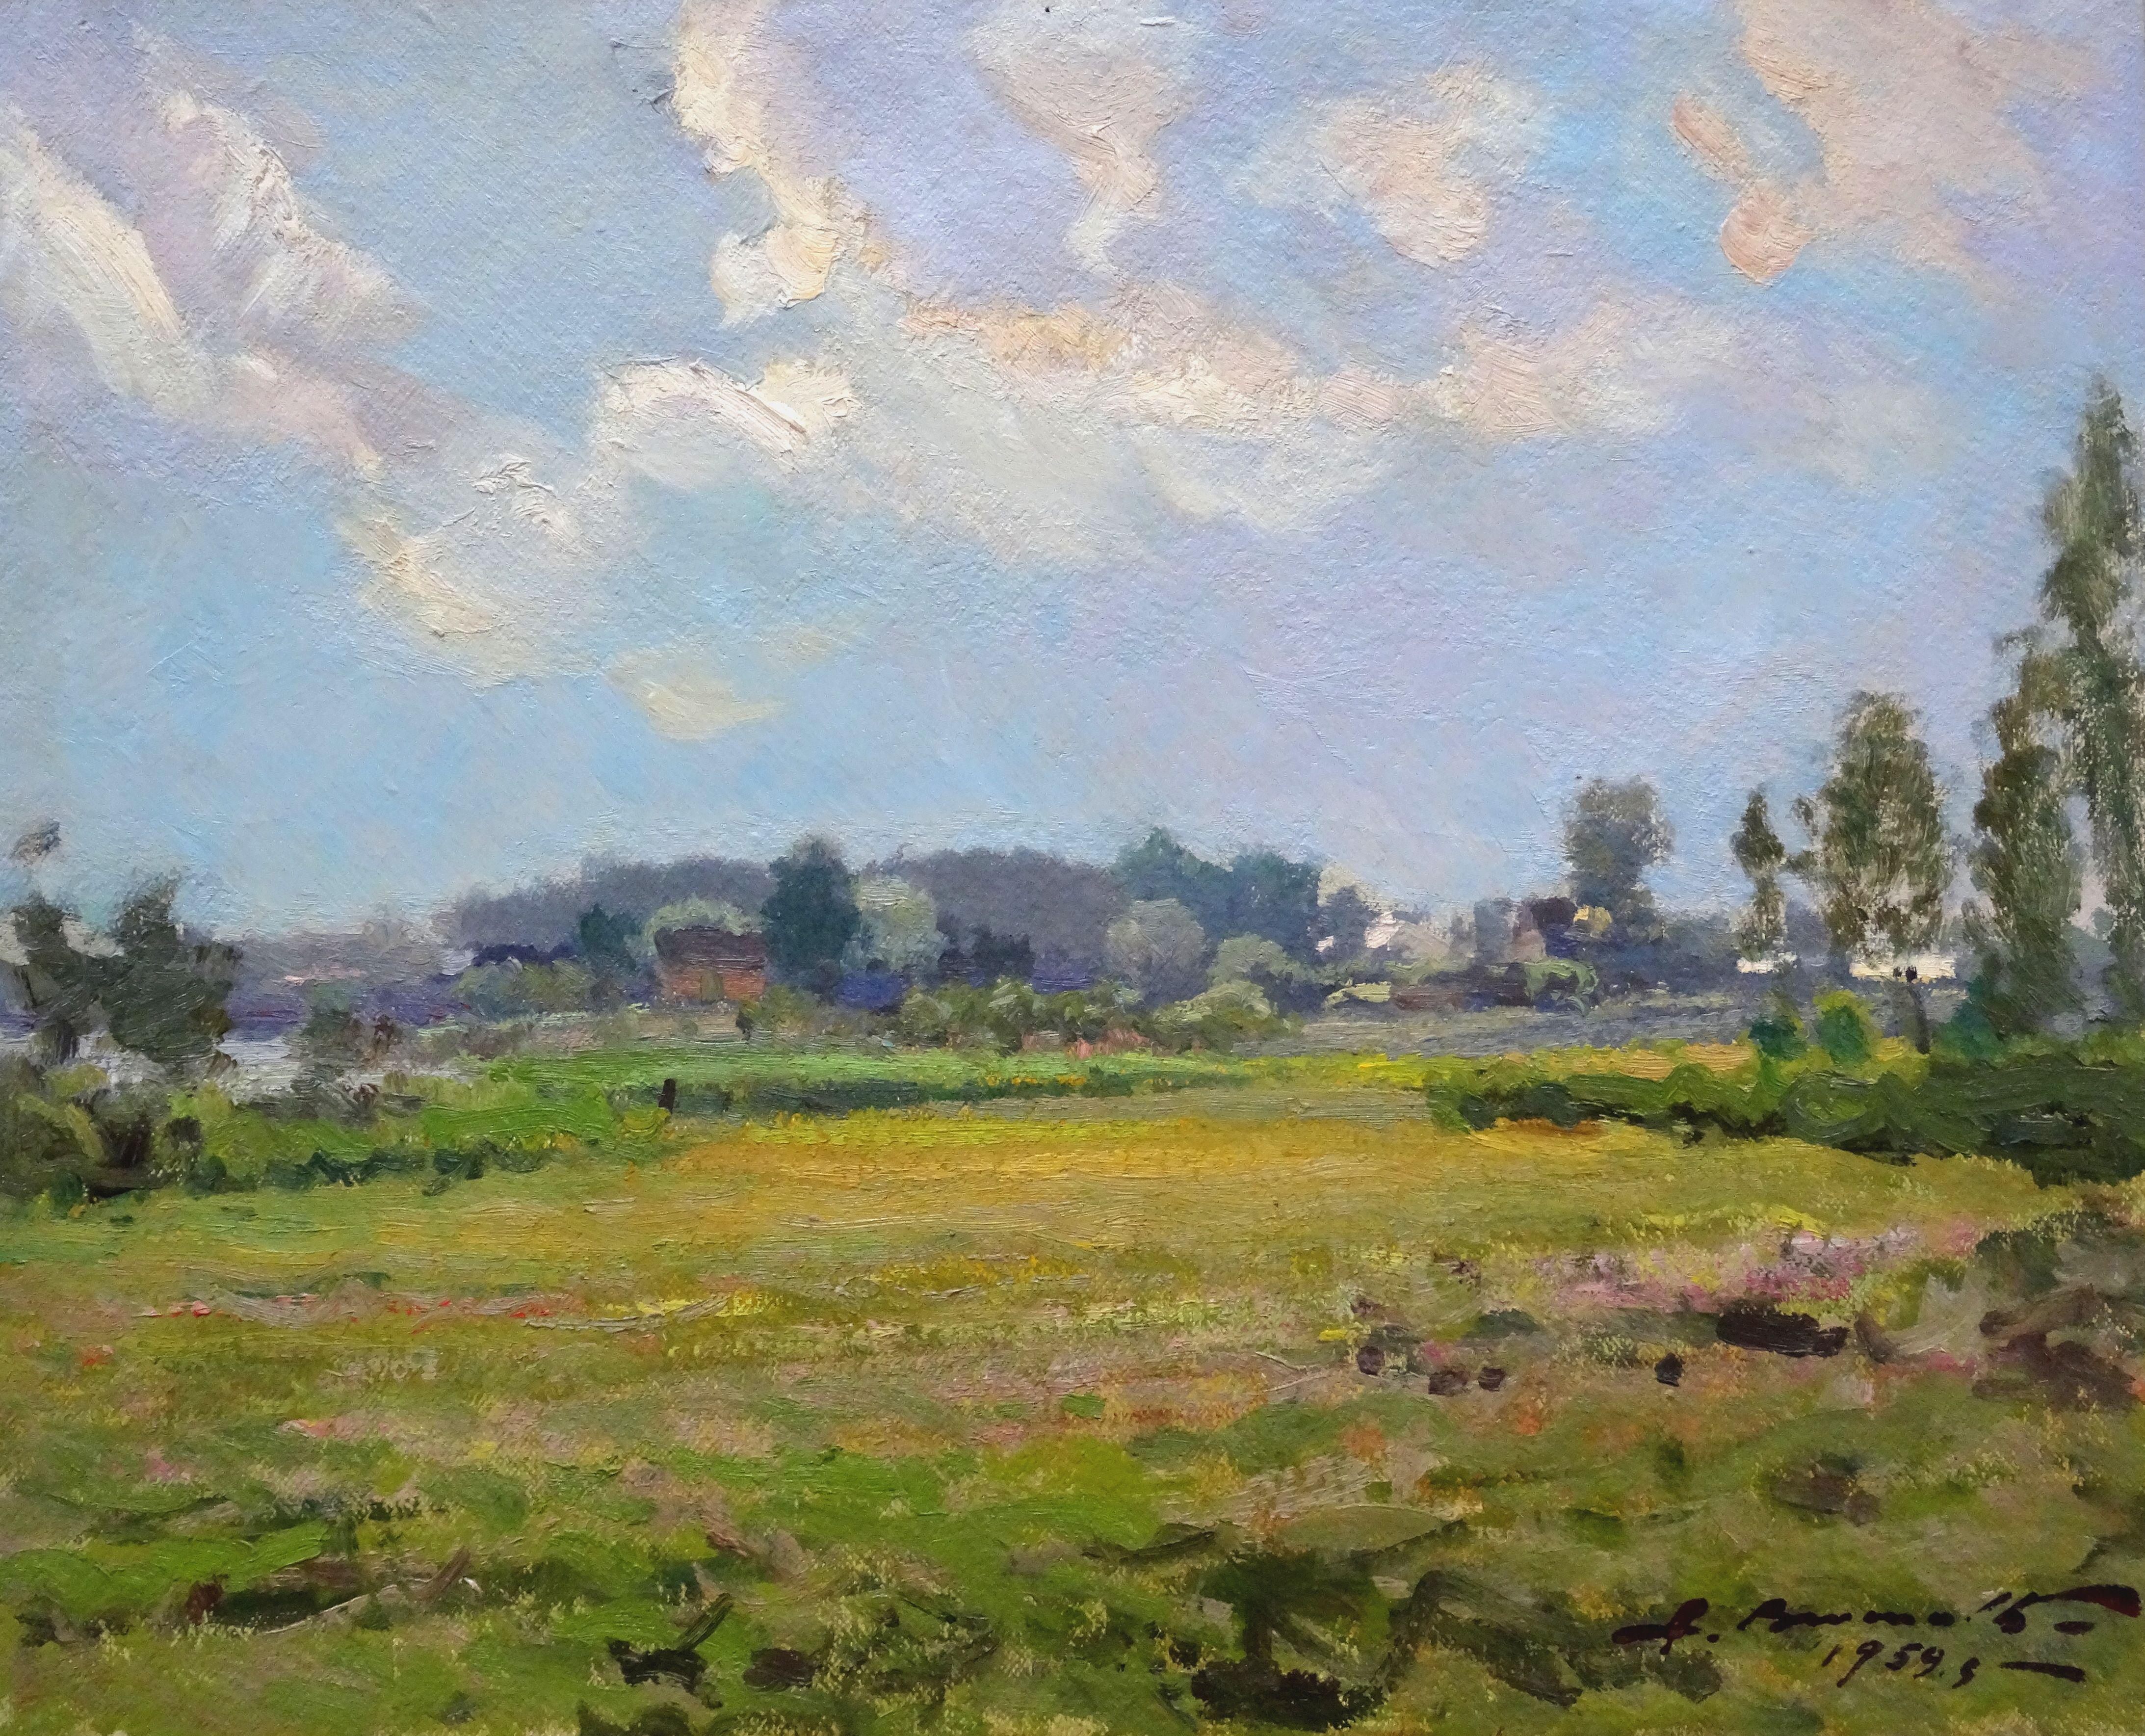 Outskirts of town. 1959, oil on cardboard, 44x54 cm